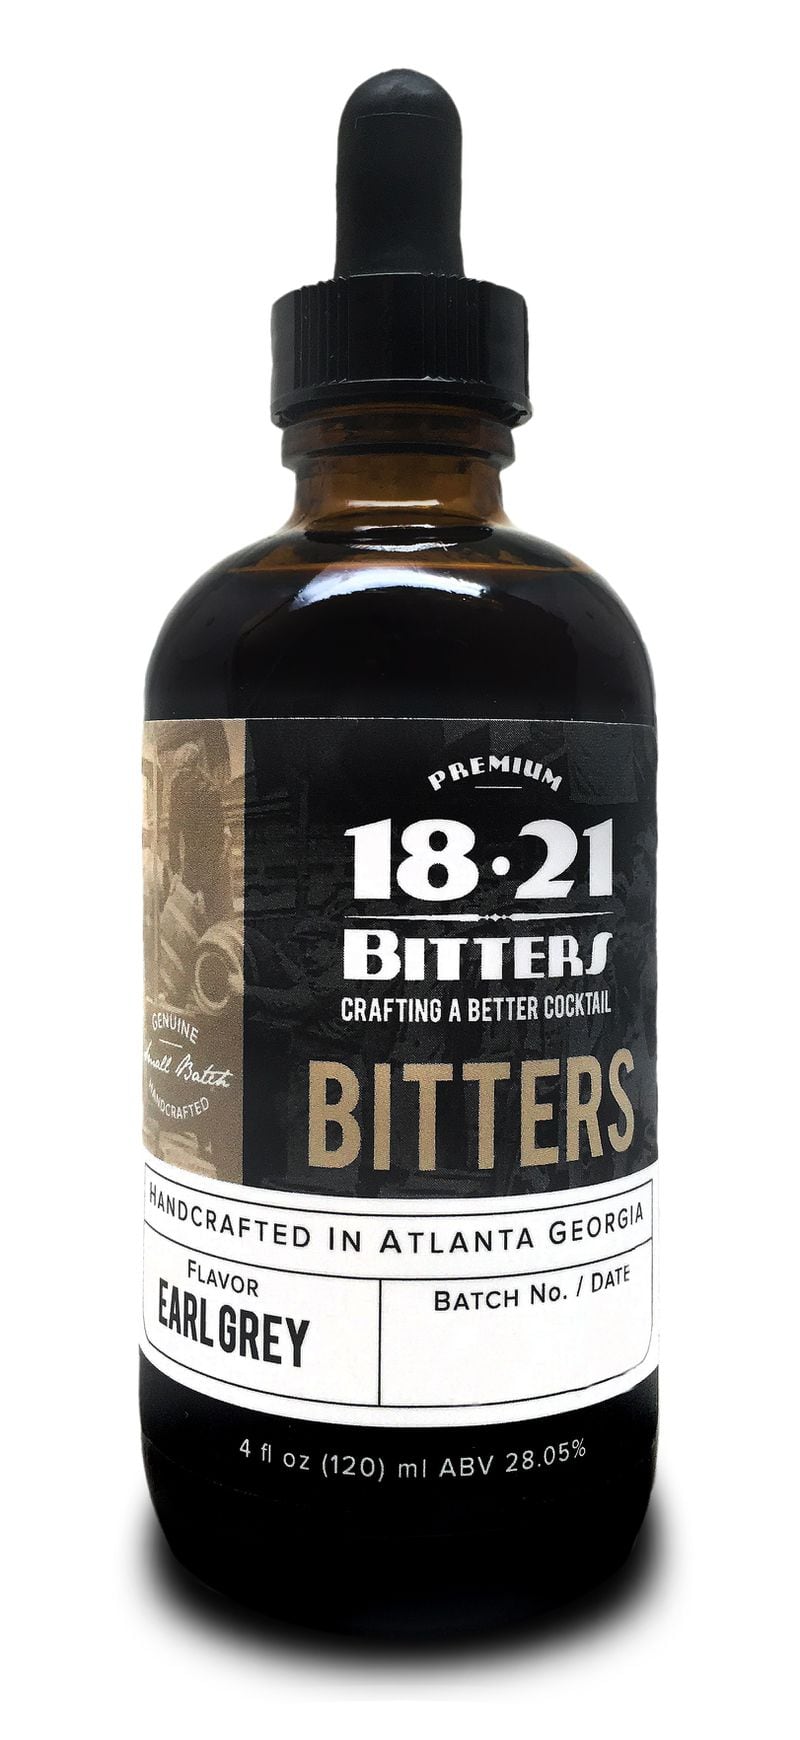 Cocktail bitters from 18.21 Bitters